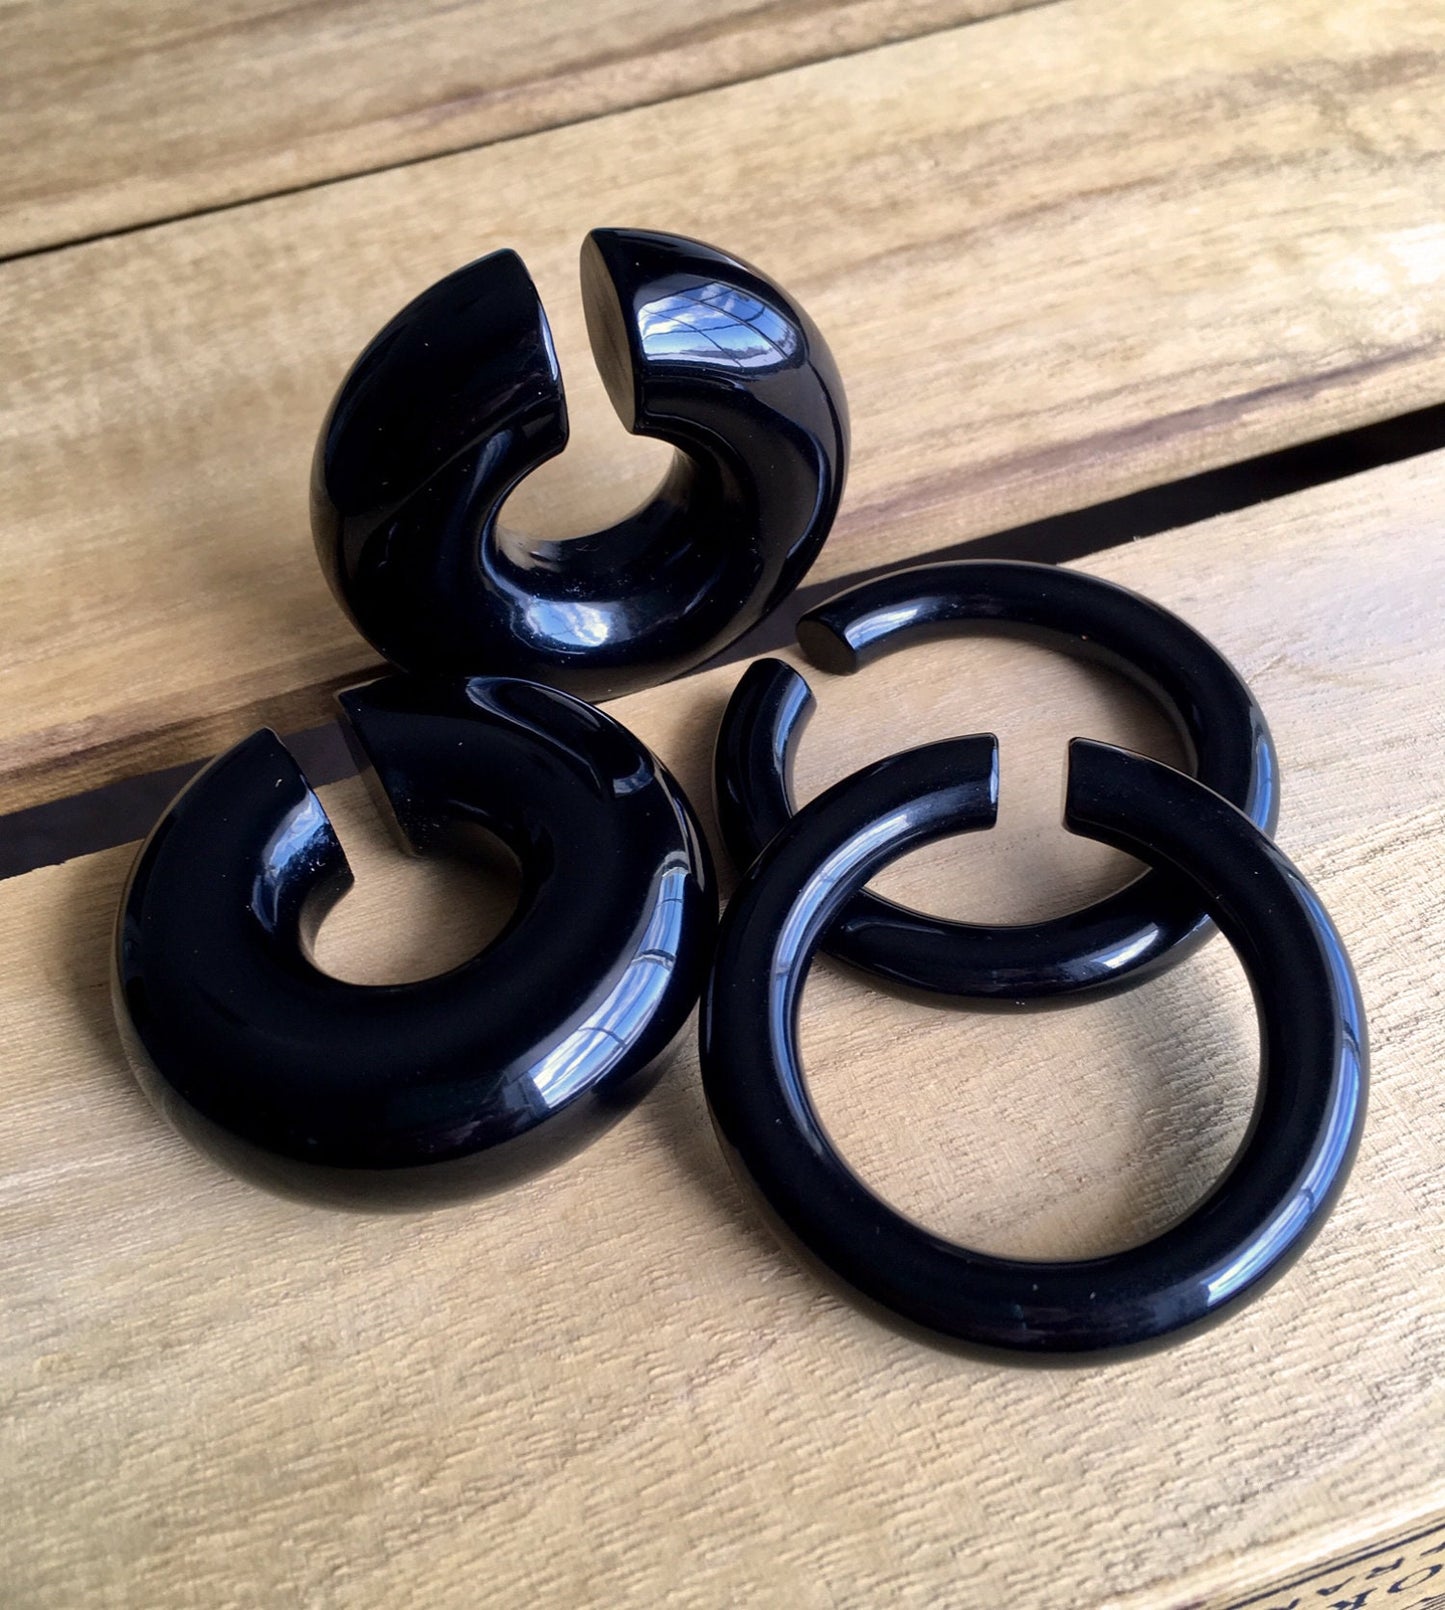 PAIR of Unique Organic Black Onyx Stone Hoops Ear Weight Hanging Plugs - Gauges 4g (5mm) up to 5/8" (16mm) available!